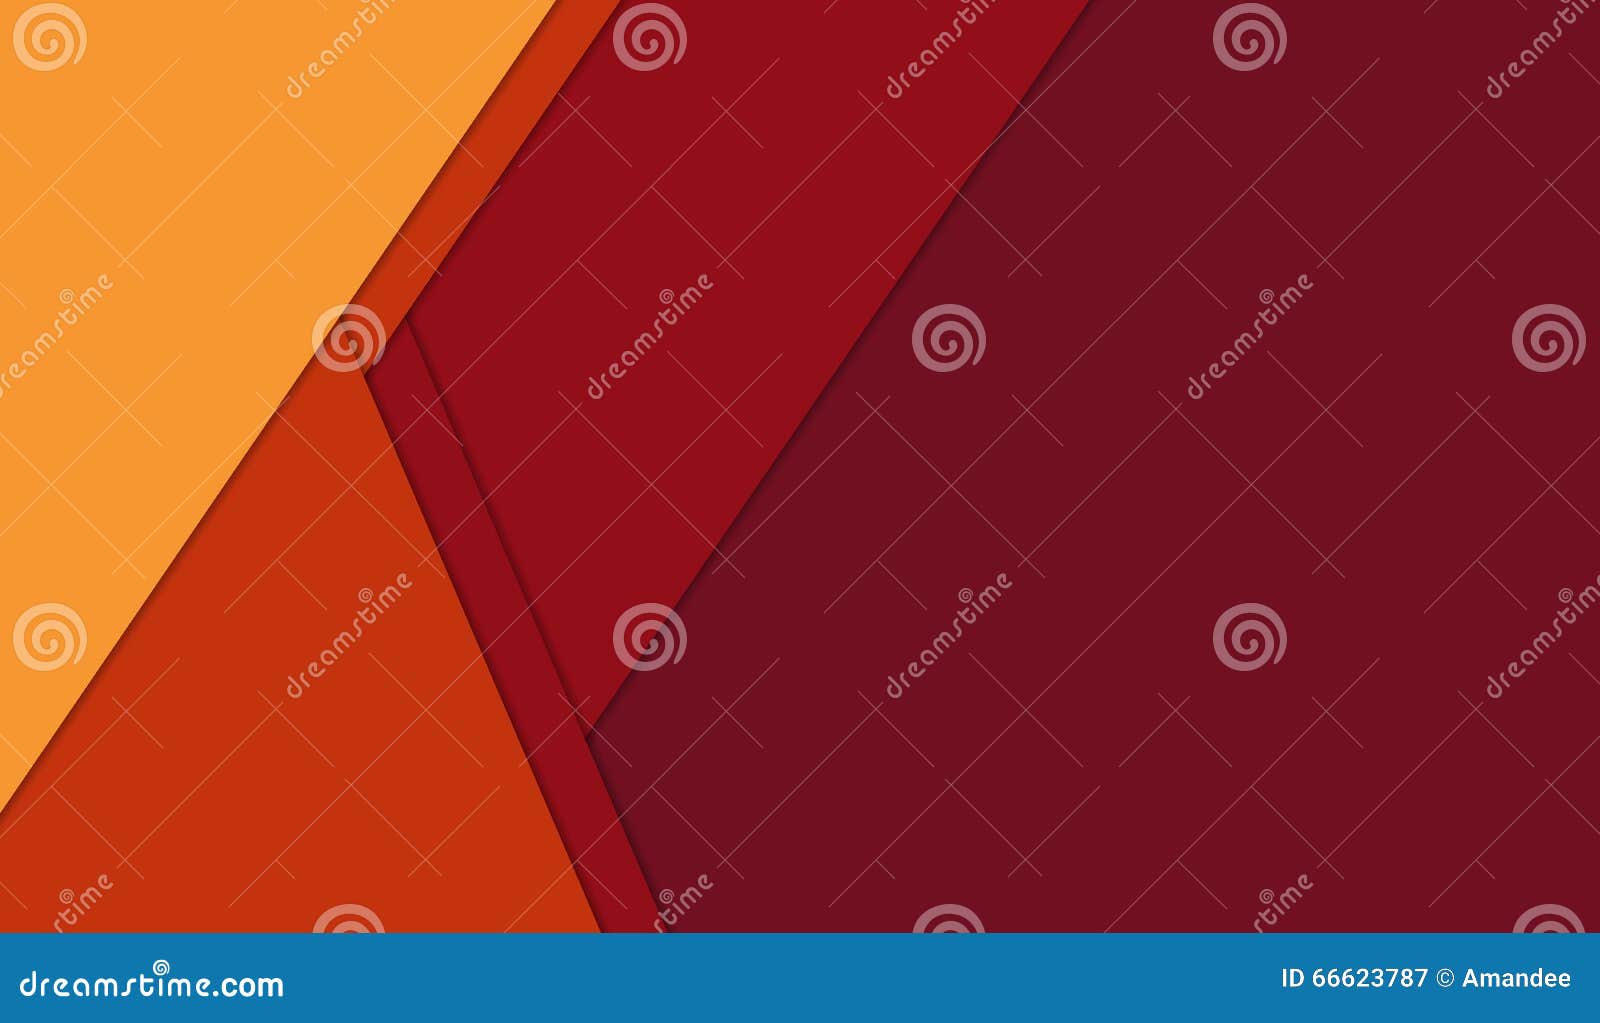 abstract geometric orange red and yellow material  background